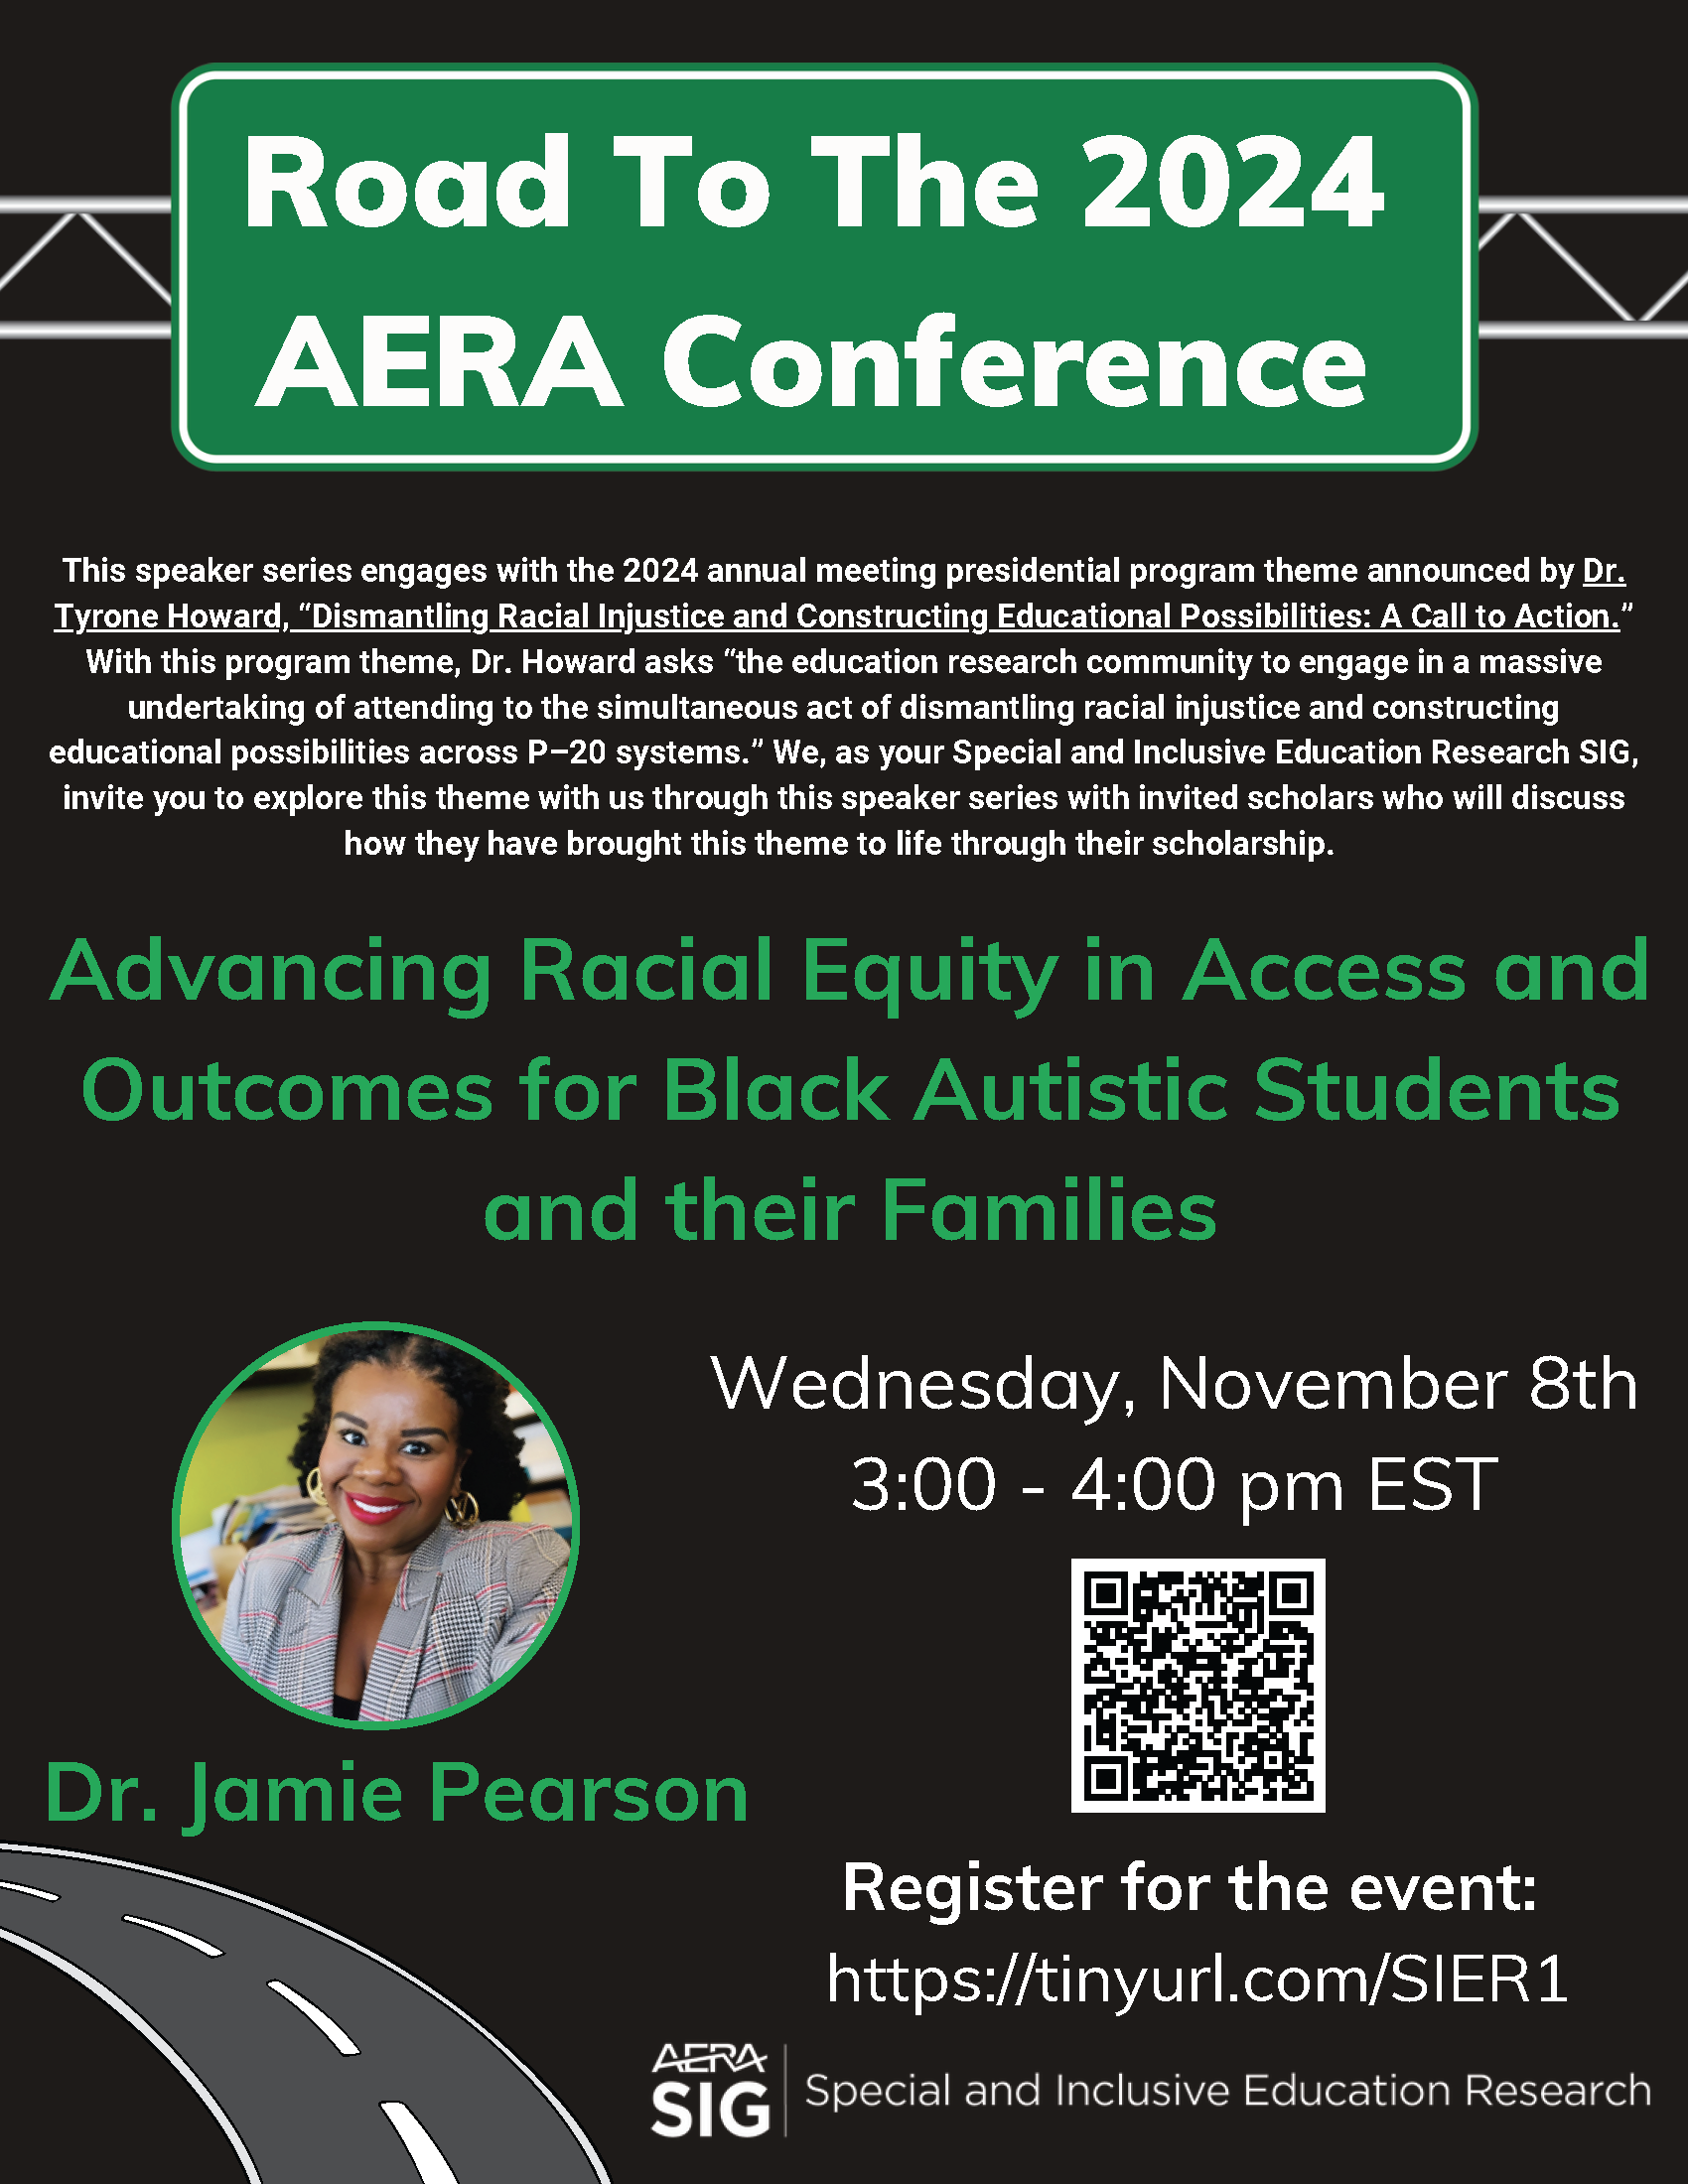 The Road to the 2024 AERA Conference is on a green highway sign at the top of the flyer. “Advancing Racial Equity in Access and Outcomes for Black Autistic Students and their Families” is in large green letters in the middle of the flyer. There is a headshot of Dr. Jamie Pearson, a Black woman wearing a plaid blazer, with curly hair and a big smile. The event is on Wednesday, November 8th, from 3:00 – 4:00 PM EST. A QR code and link to register (https://tinyurl.com/SIER1) are included. The AERA Special and Inclusive Education Research SIG logo is in the lower right corner. A grey and white highway image is in the lower left corner. 